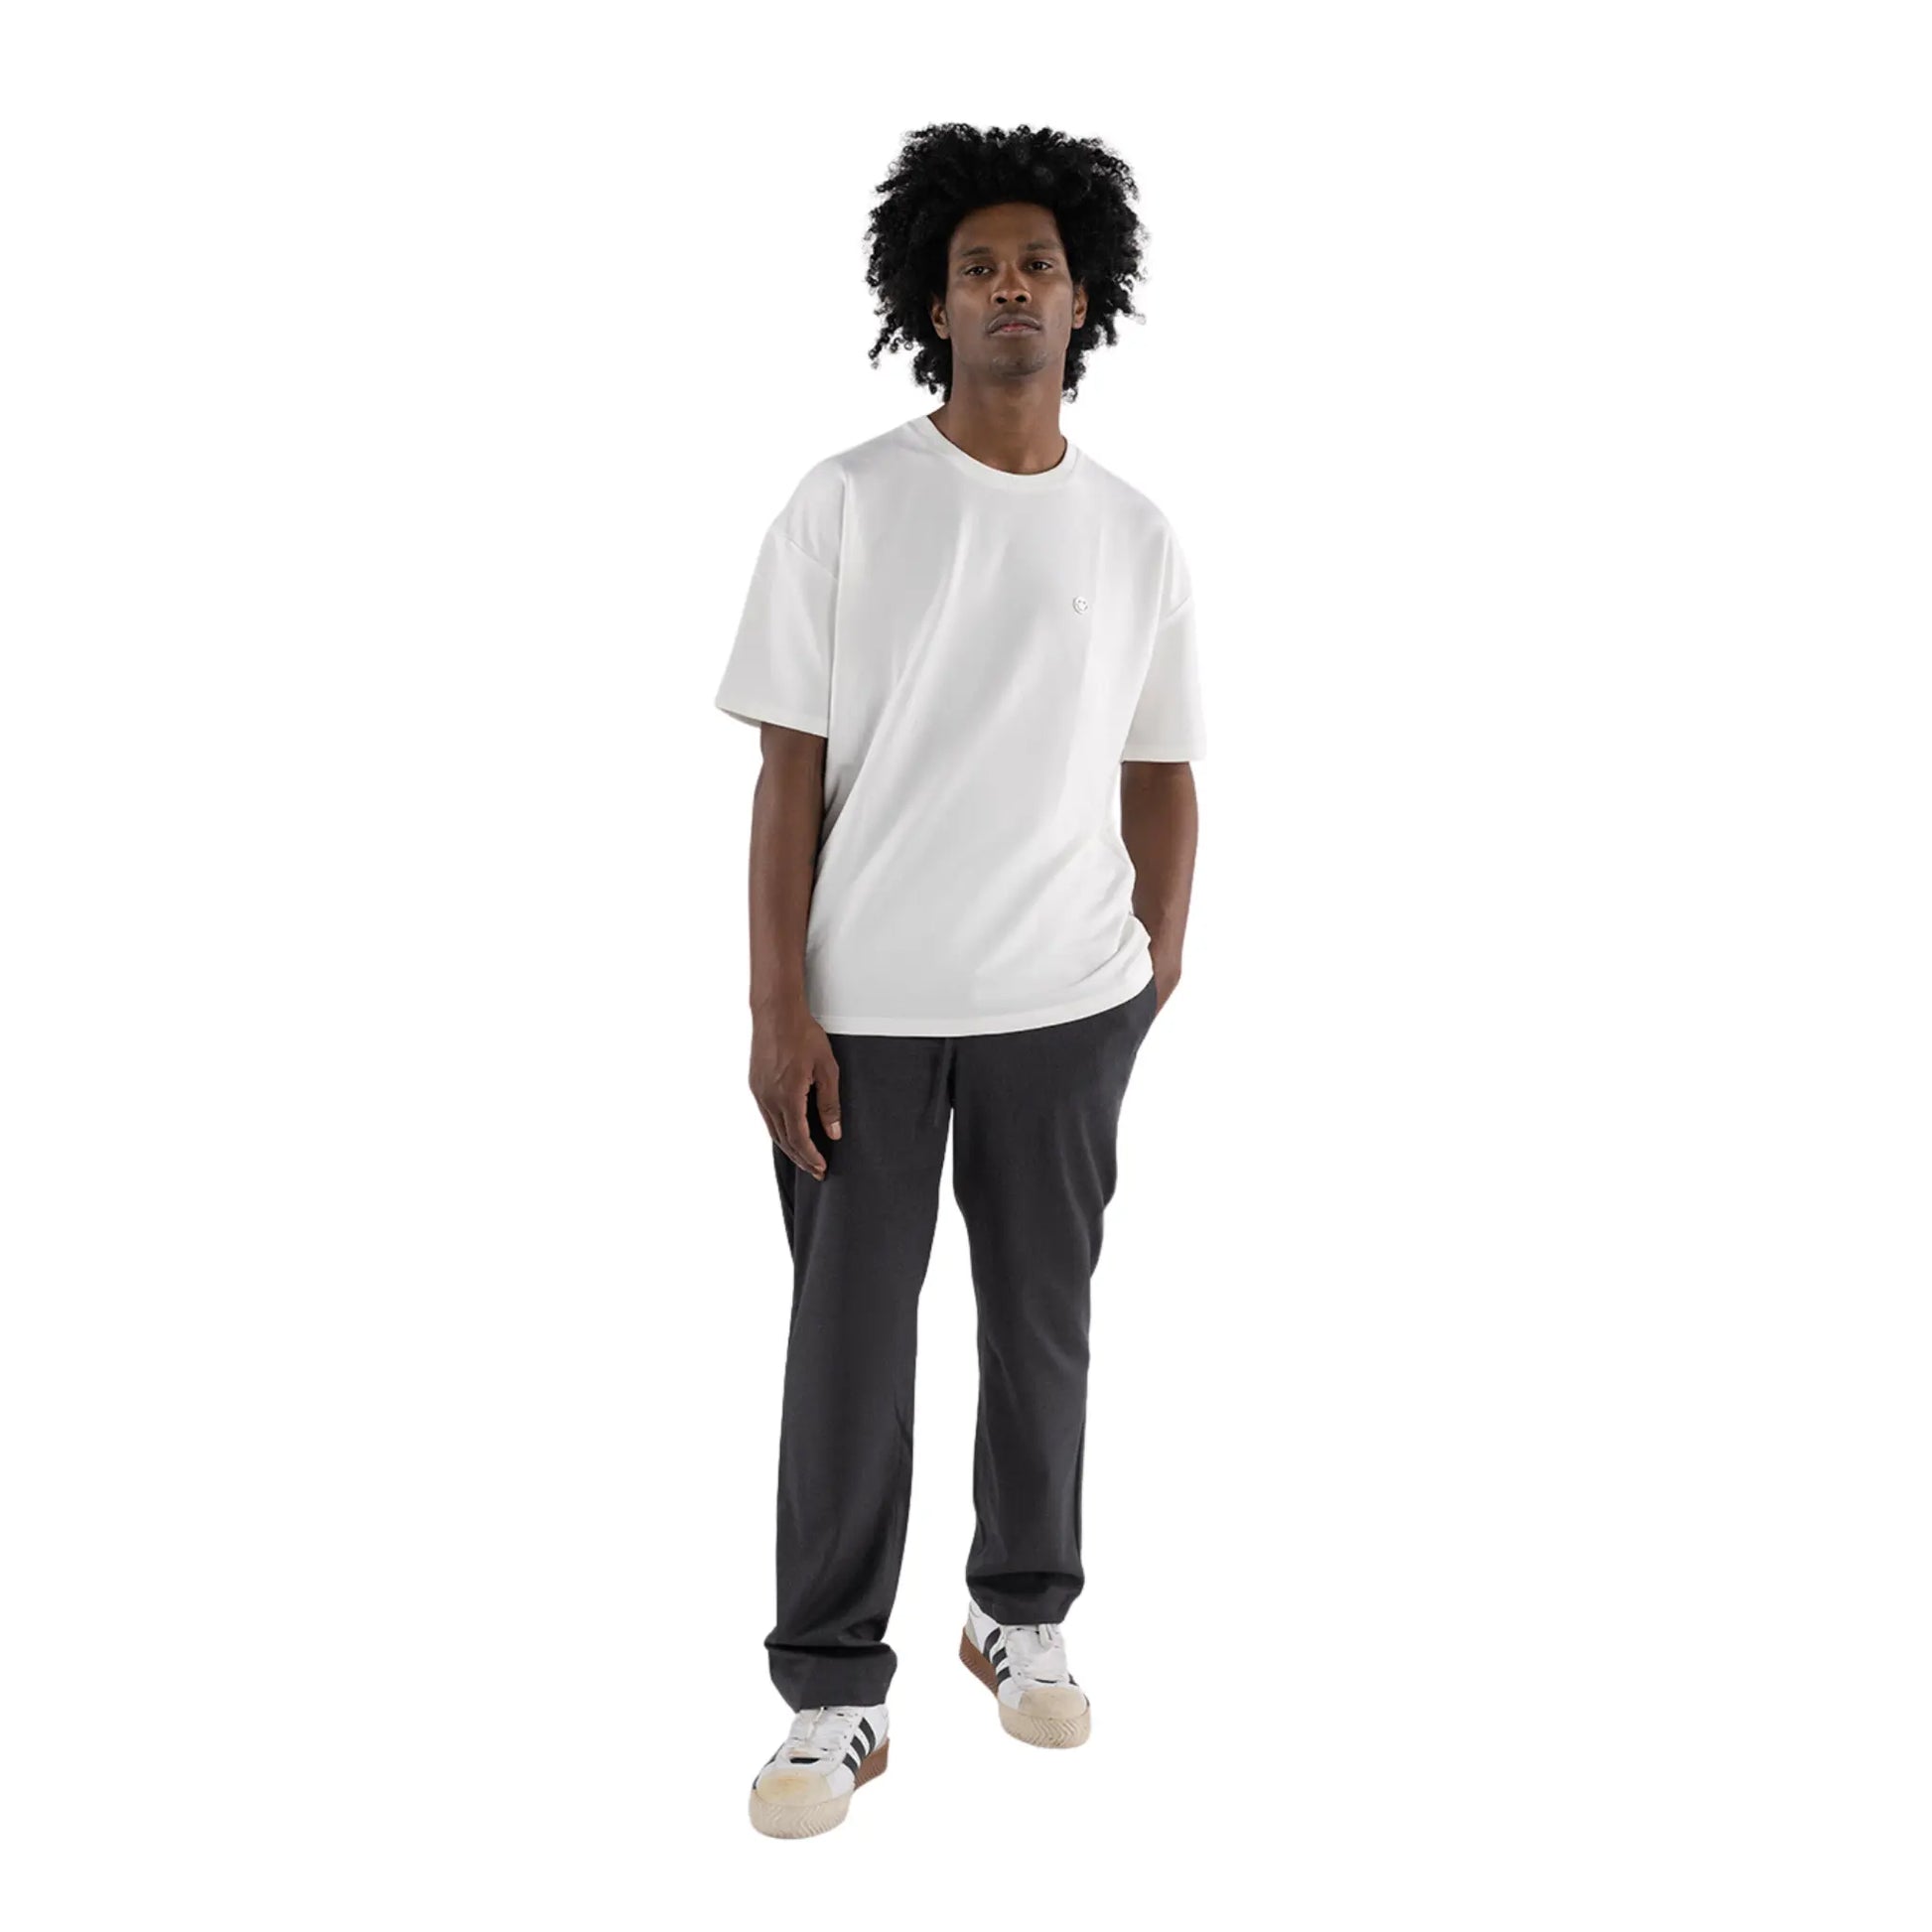 Oversized T-shirt White worn by black man front view